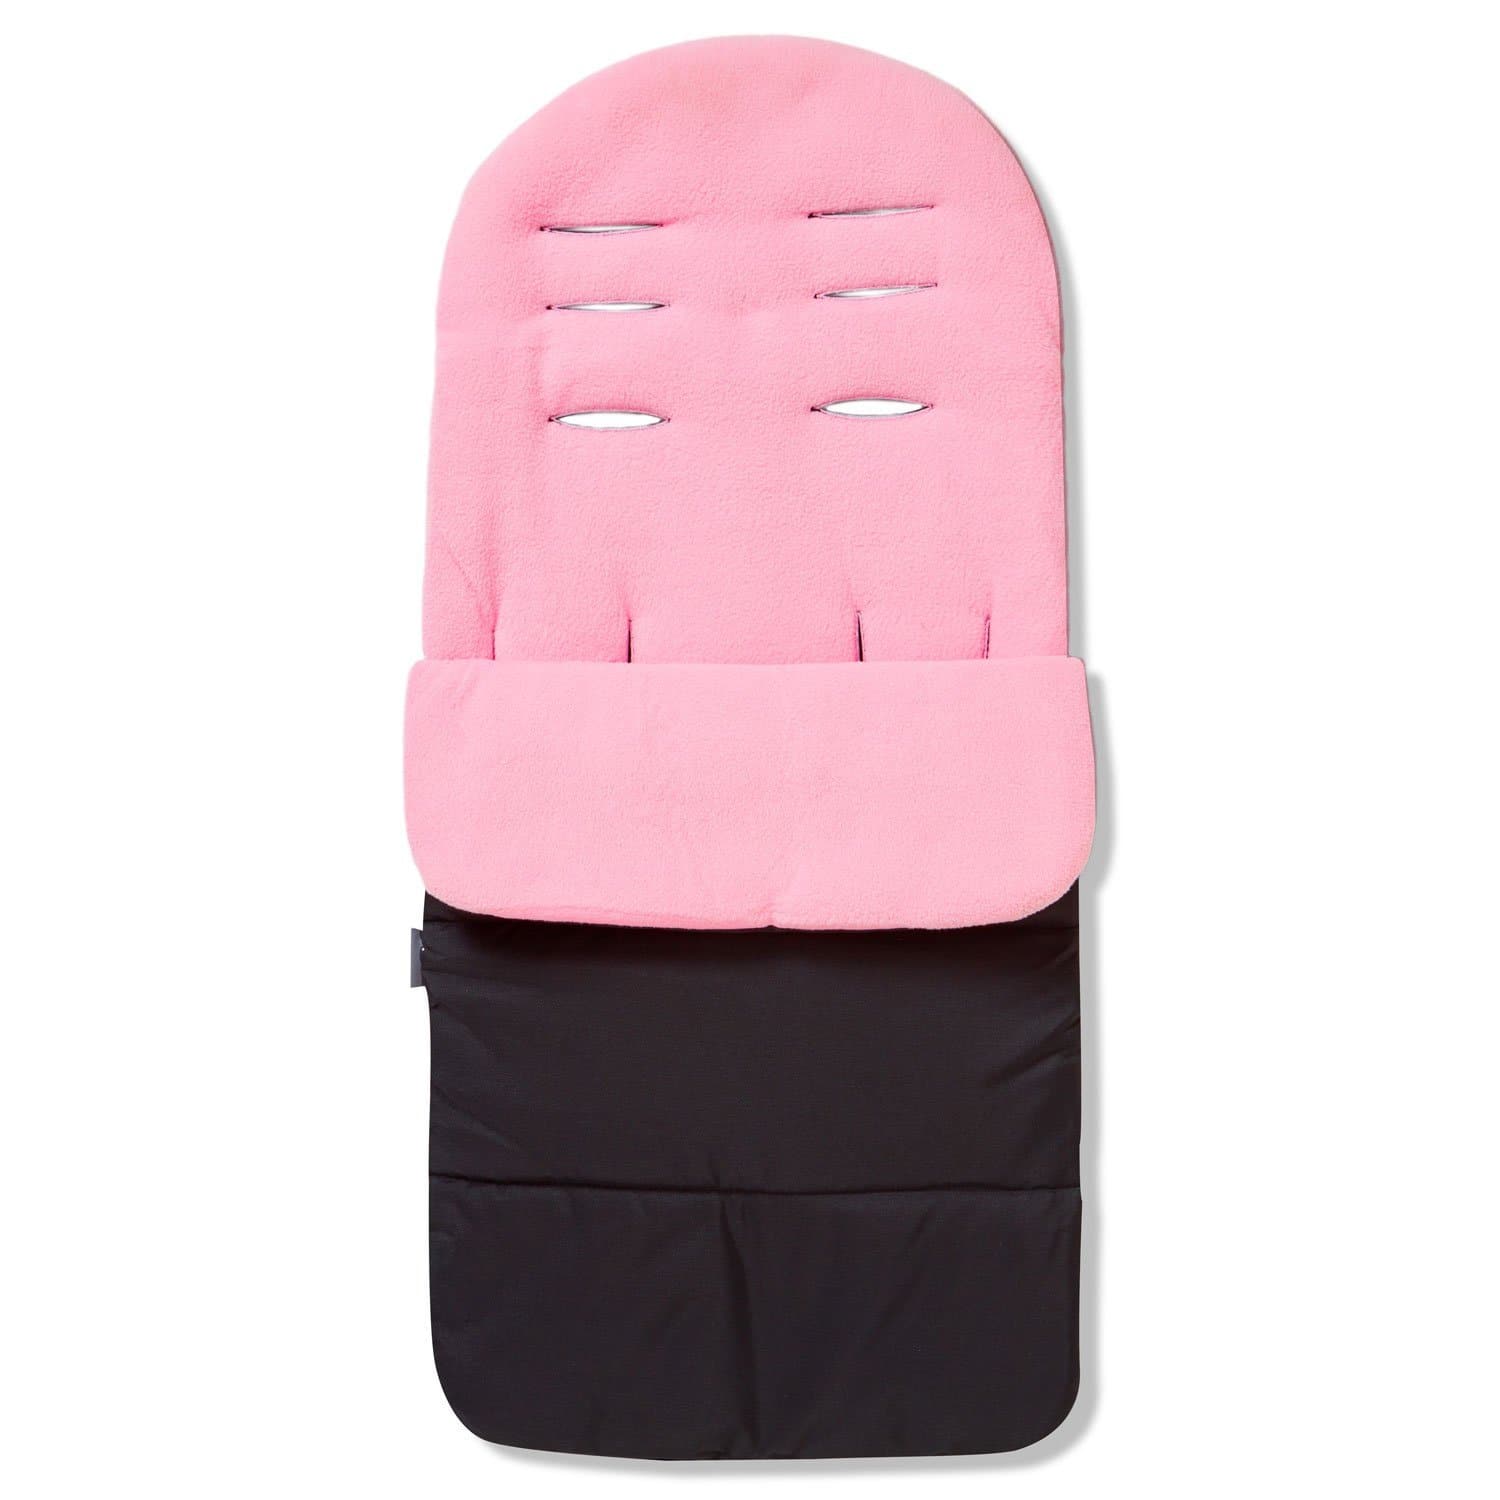 Premium Footmuff / Cosy Toes Compatible with Babylo - Candy Pink / Fits All Models | For Your Little One